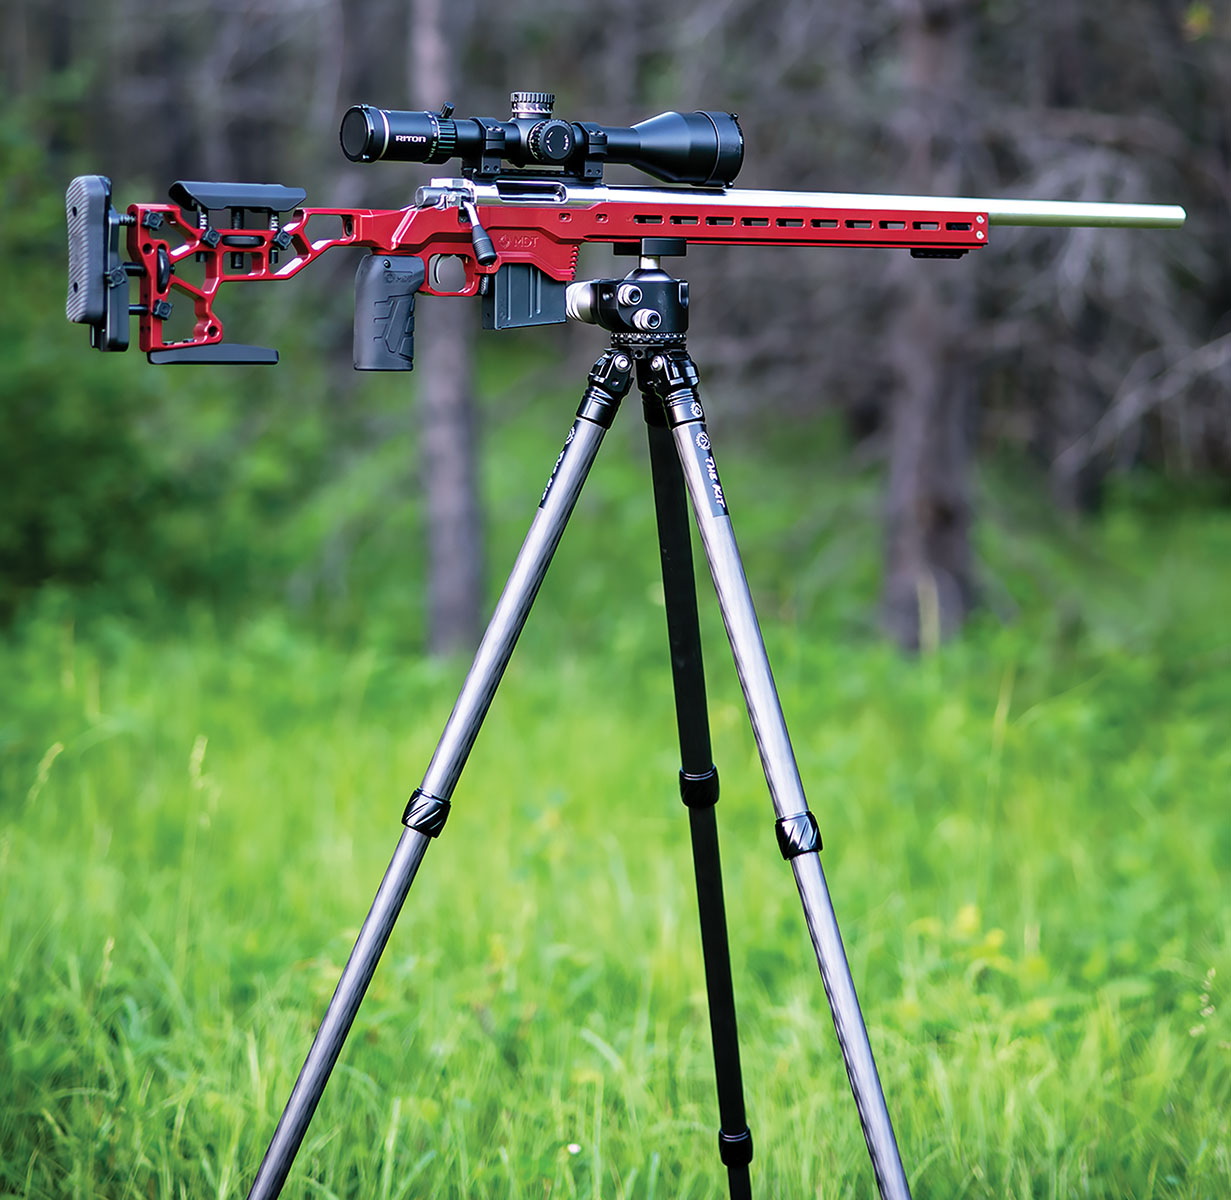 Neil (Satch) Megyes, owner of Chinook Arms and Ibex Industries in Taber, Alberta, Canada, assembled this beautiful rig for me. He did a custom coating of his limited edition “Ibex Red” on the MDT ACC chassis, and I couldn’t be happier with how it turned out.